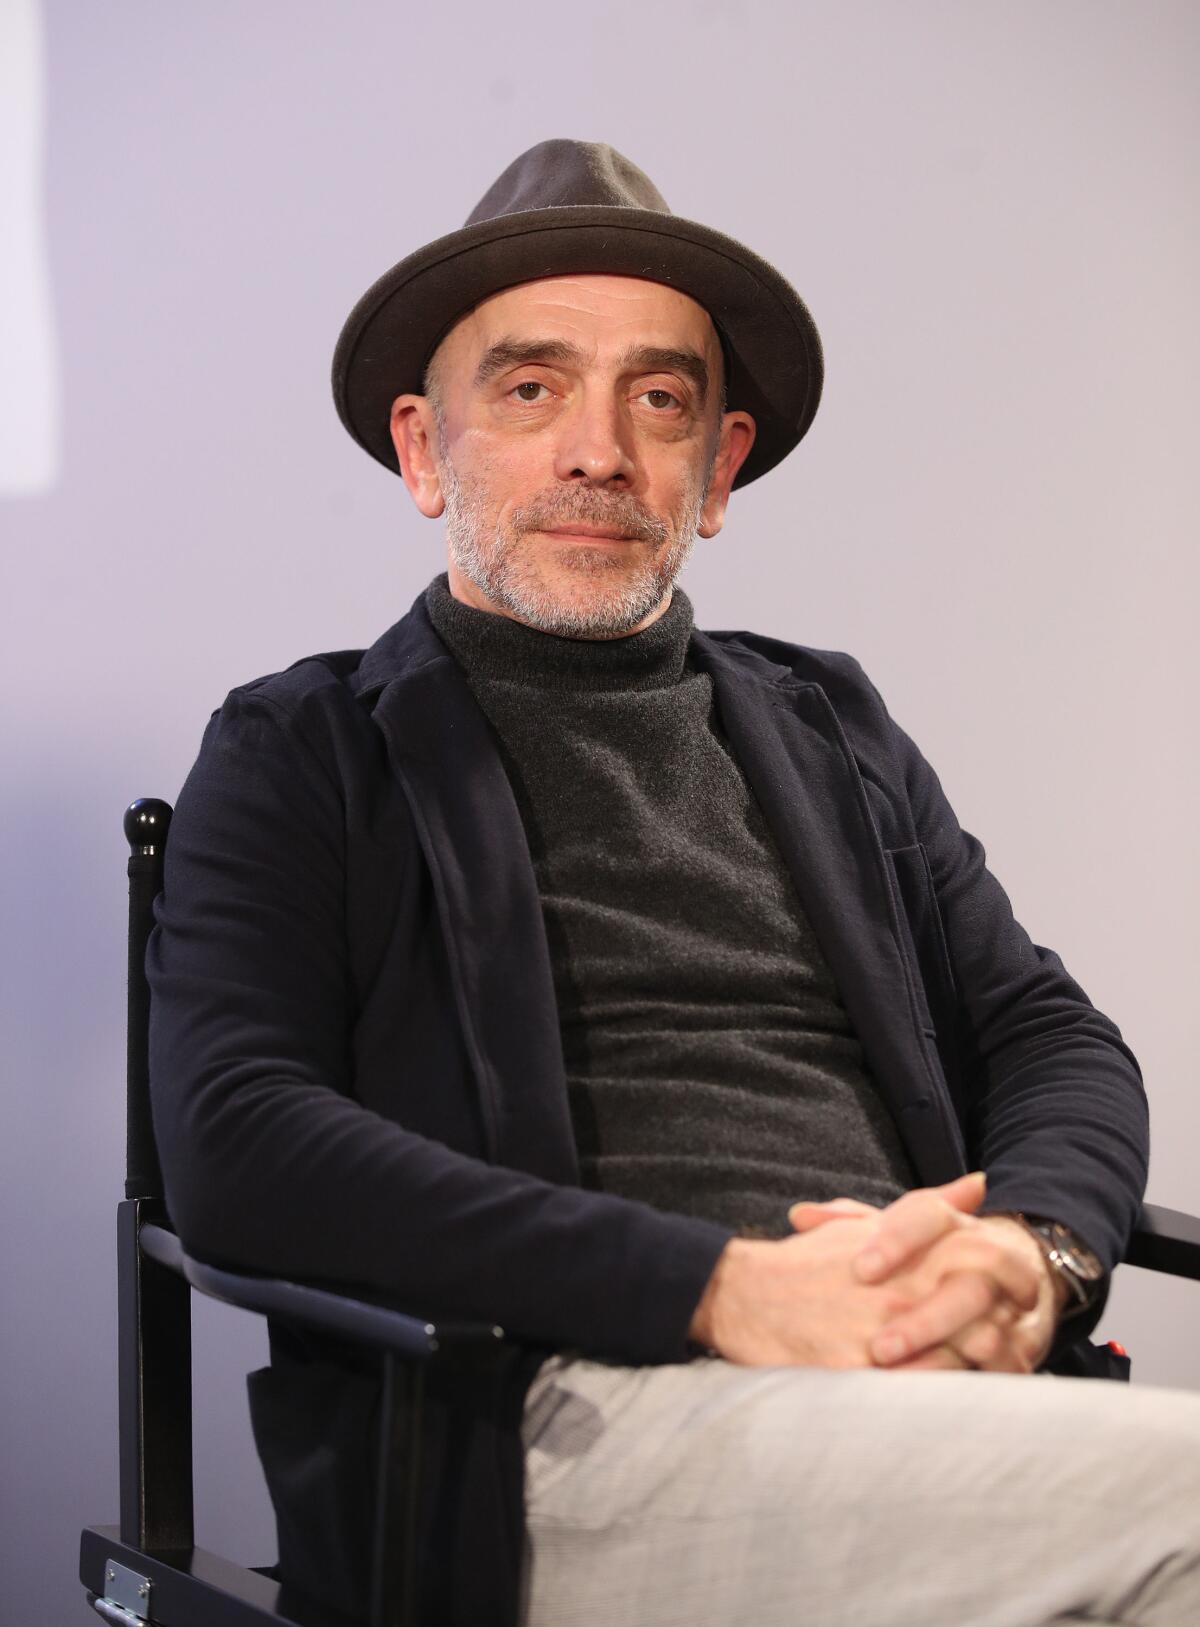 A man with short, gray facial hair in a wide-brimmed hat, a dark sweater and shirt sitting with his hands on his lap 